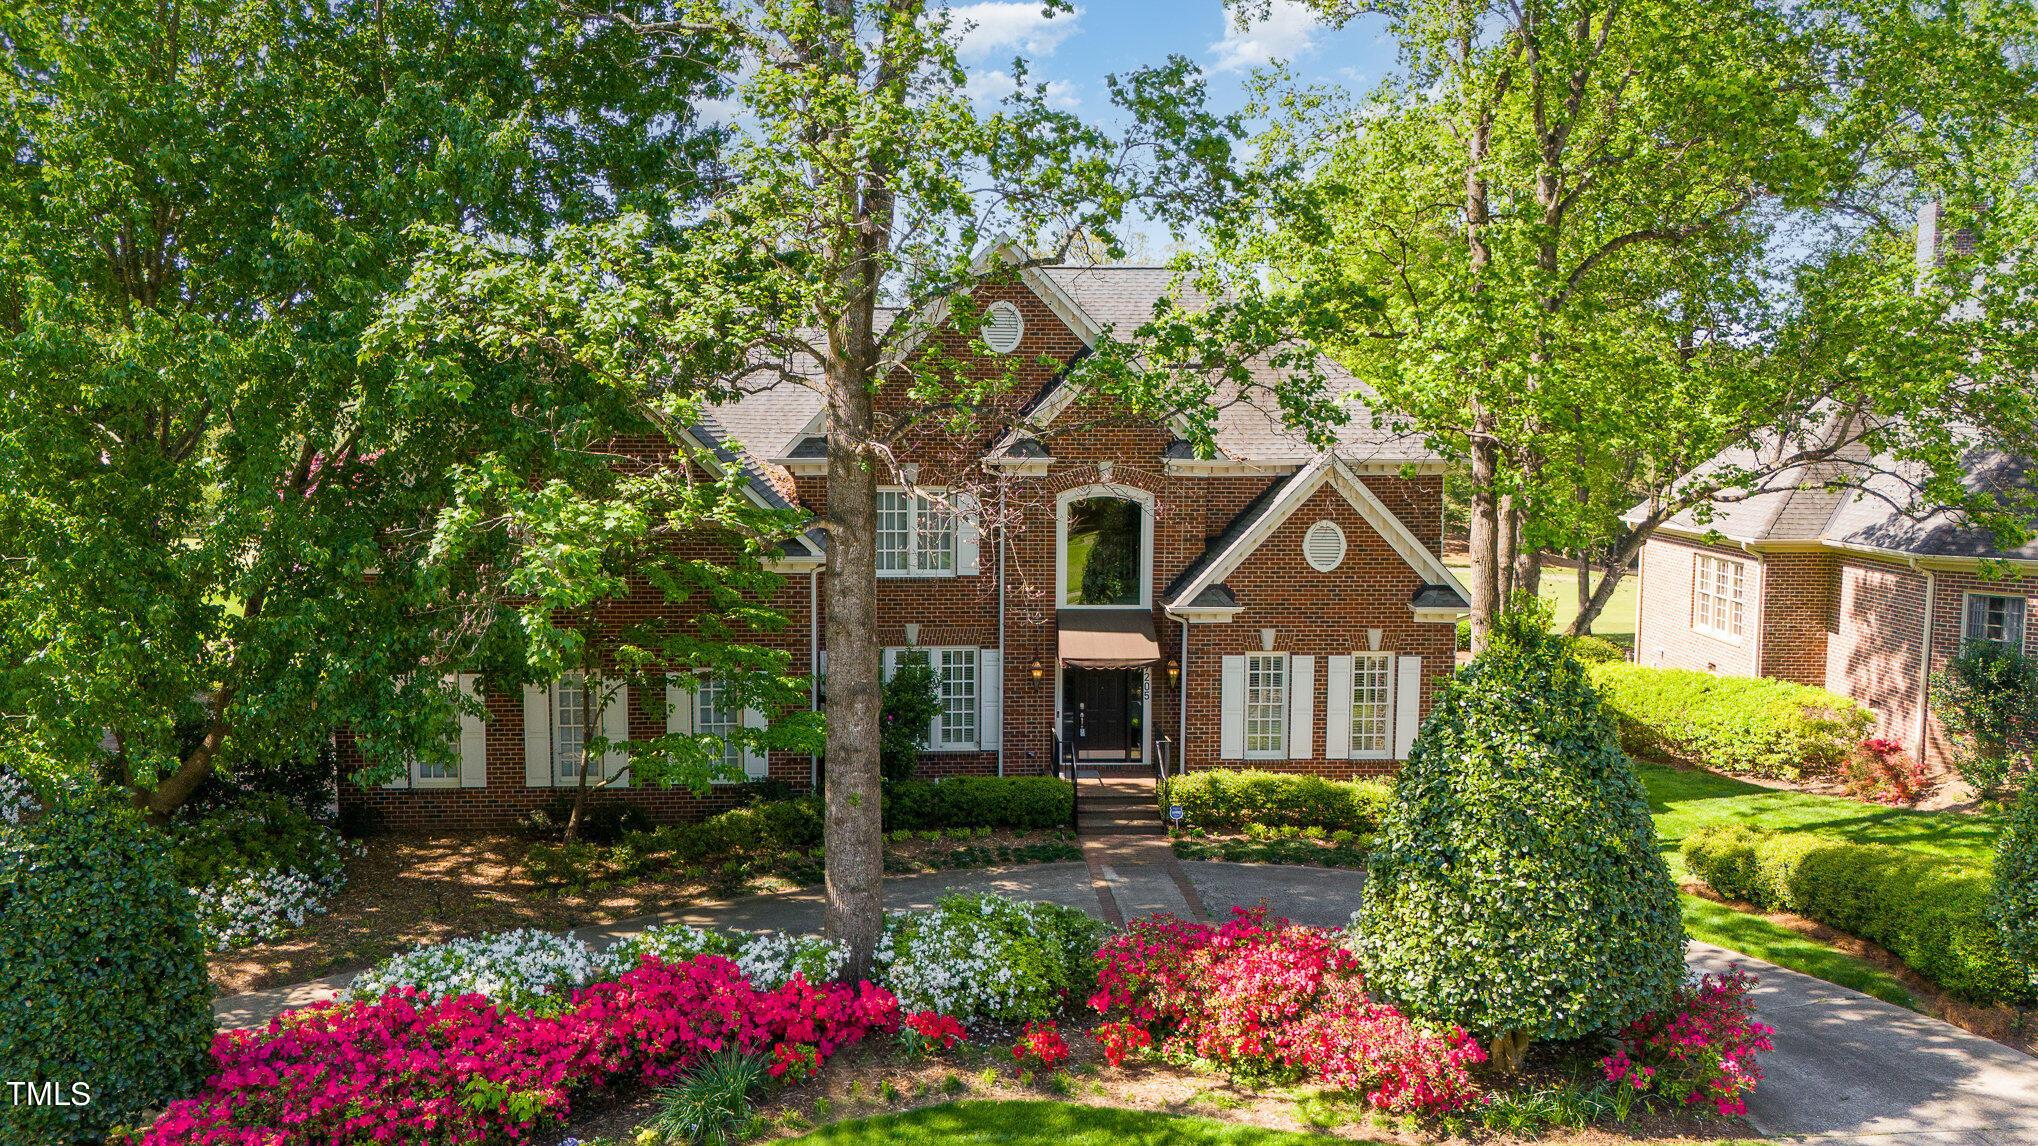 Photo one of 7205 Manor Oaks Dr Raleigh NC 27615 | MLS 2542645